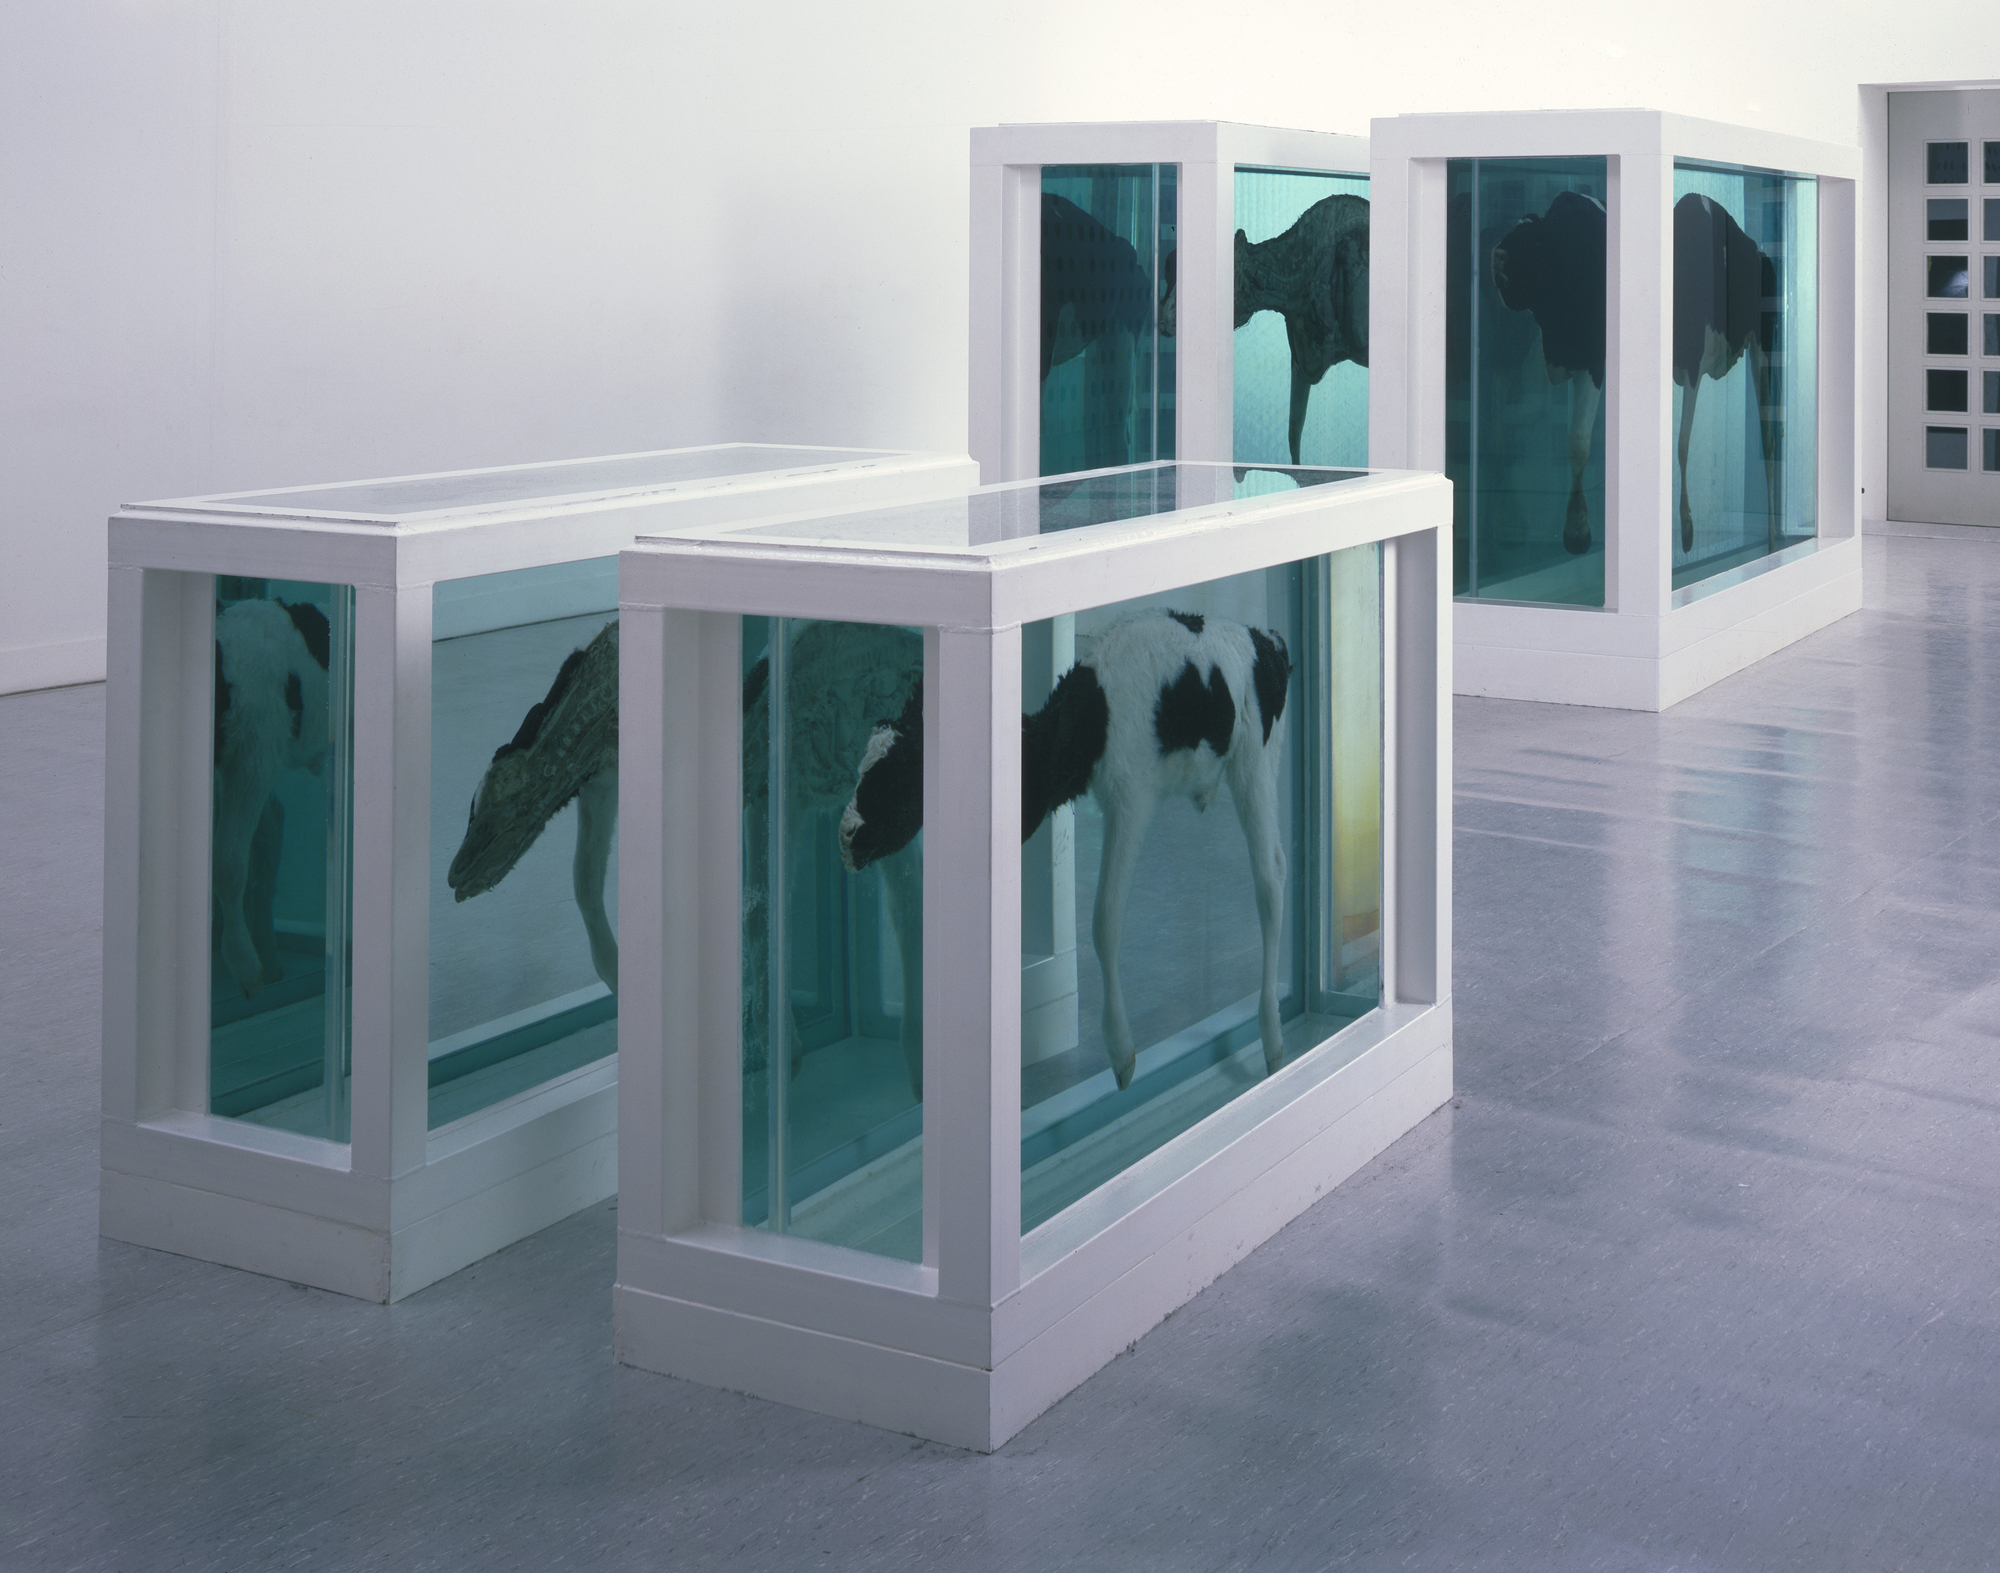 Damien Hirst, 'Mother and Child, Divided' (1993) 208.6 x 332.5 x 109cm (x2), 113.6 x 169 x 62cm (x2); steel, GRP composites, glass, silicone, cow, calf, formaldehyde solution